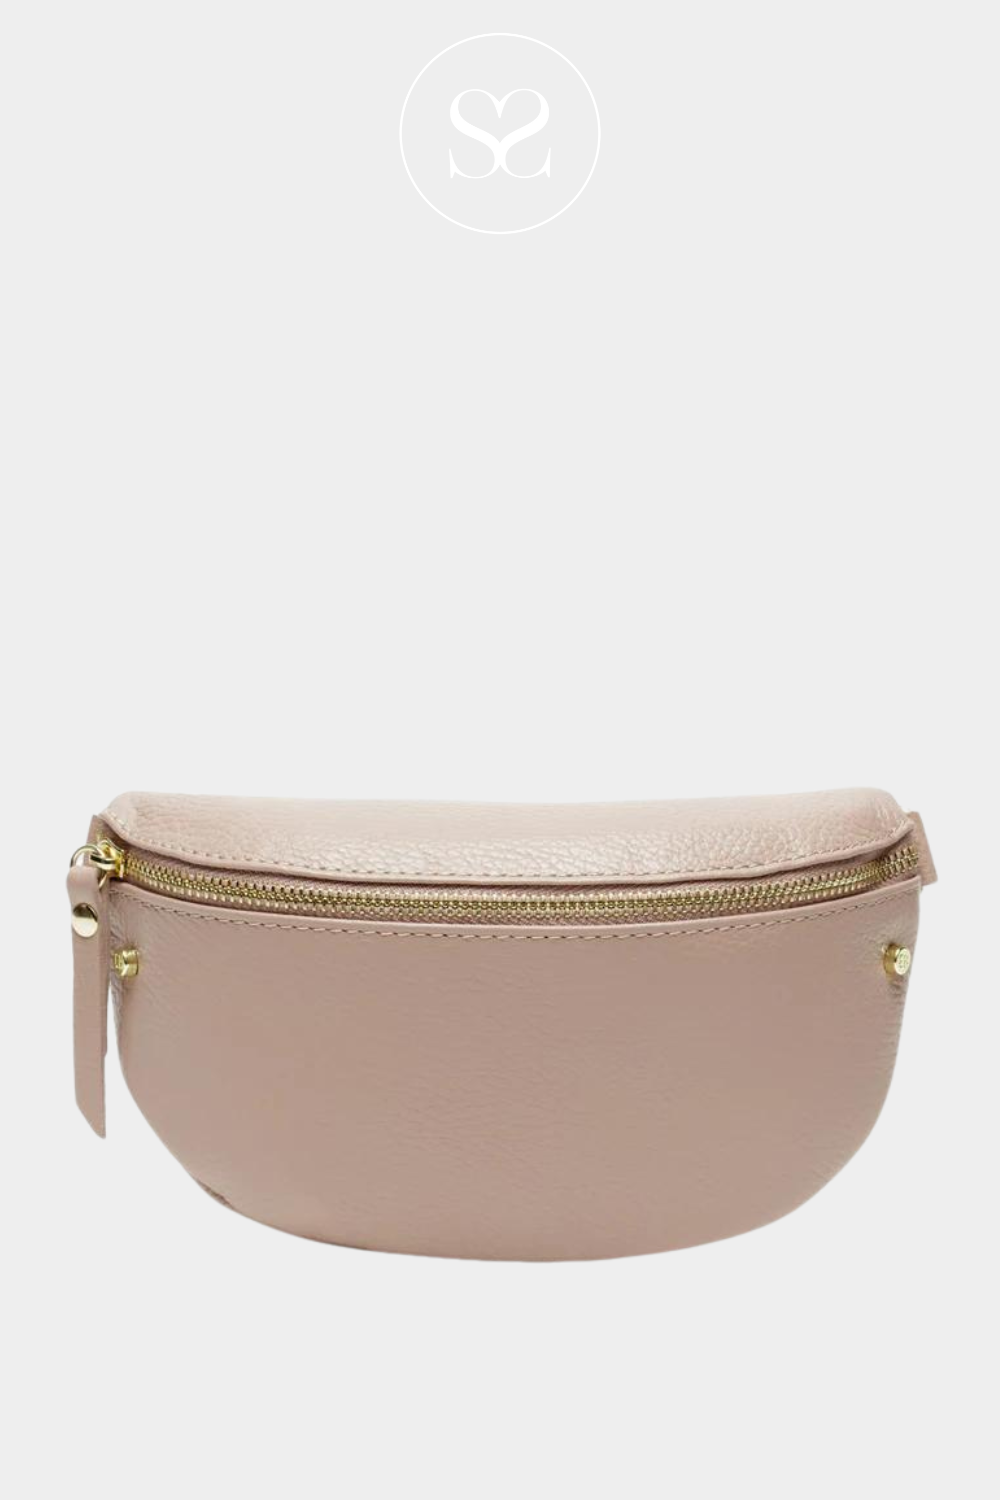 pink crossbody sling bag from Elie Beaumont Ireland